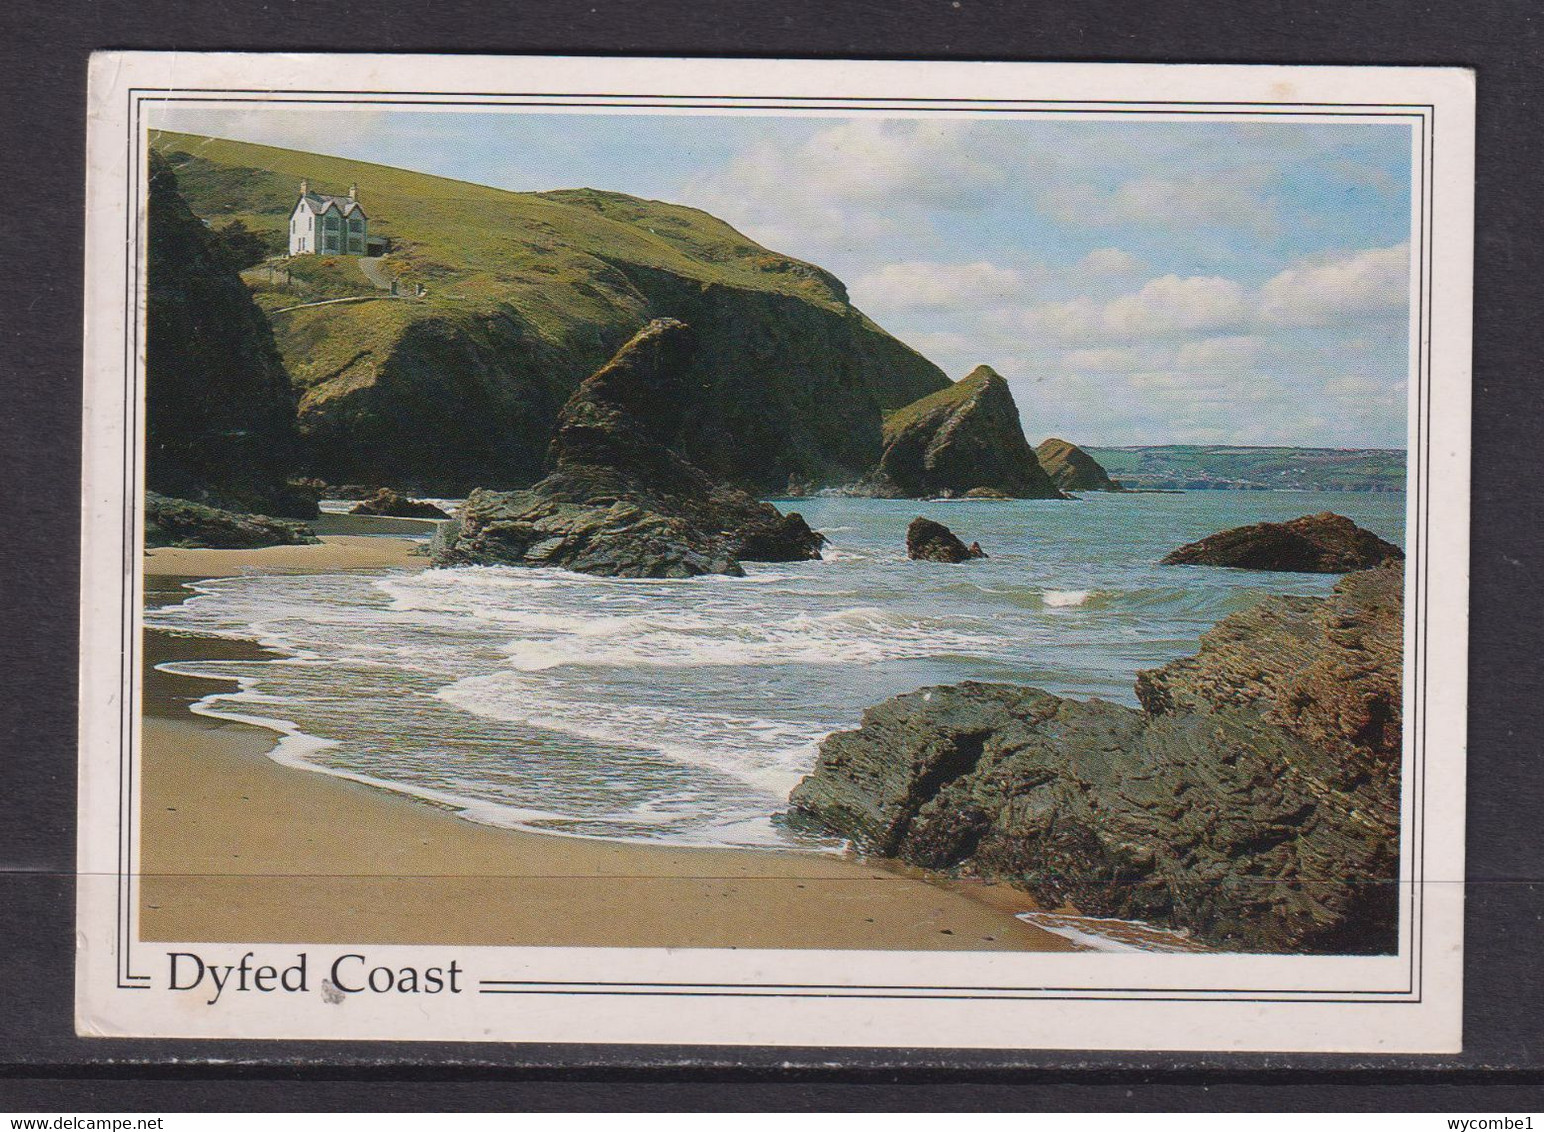 WALES - Llangranog The Beach Used Postcard As Scans - Cardiganshire